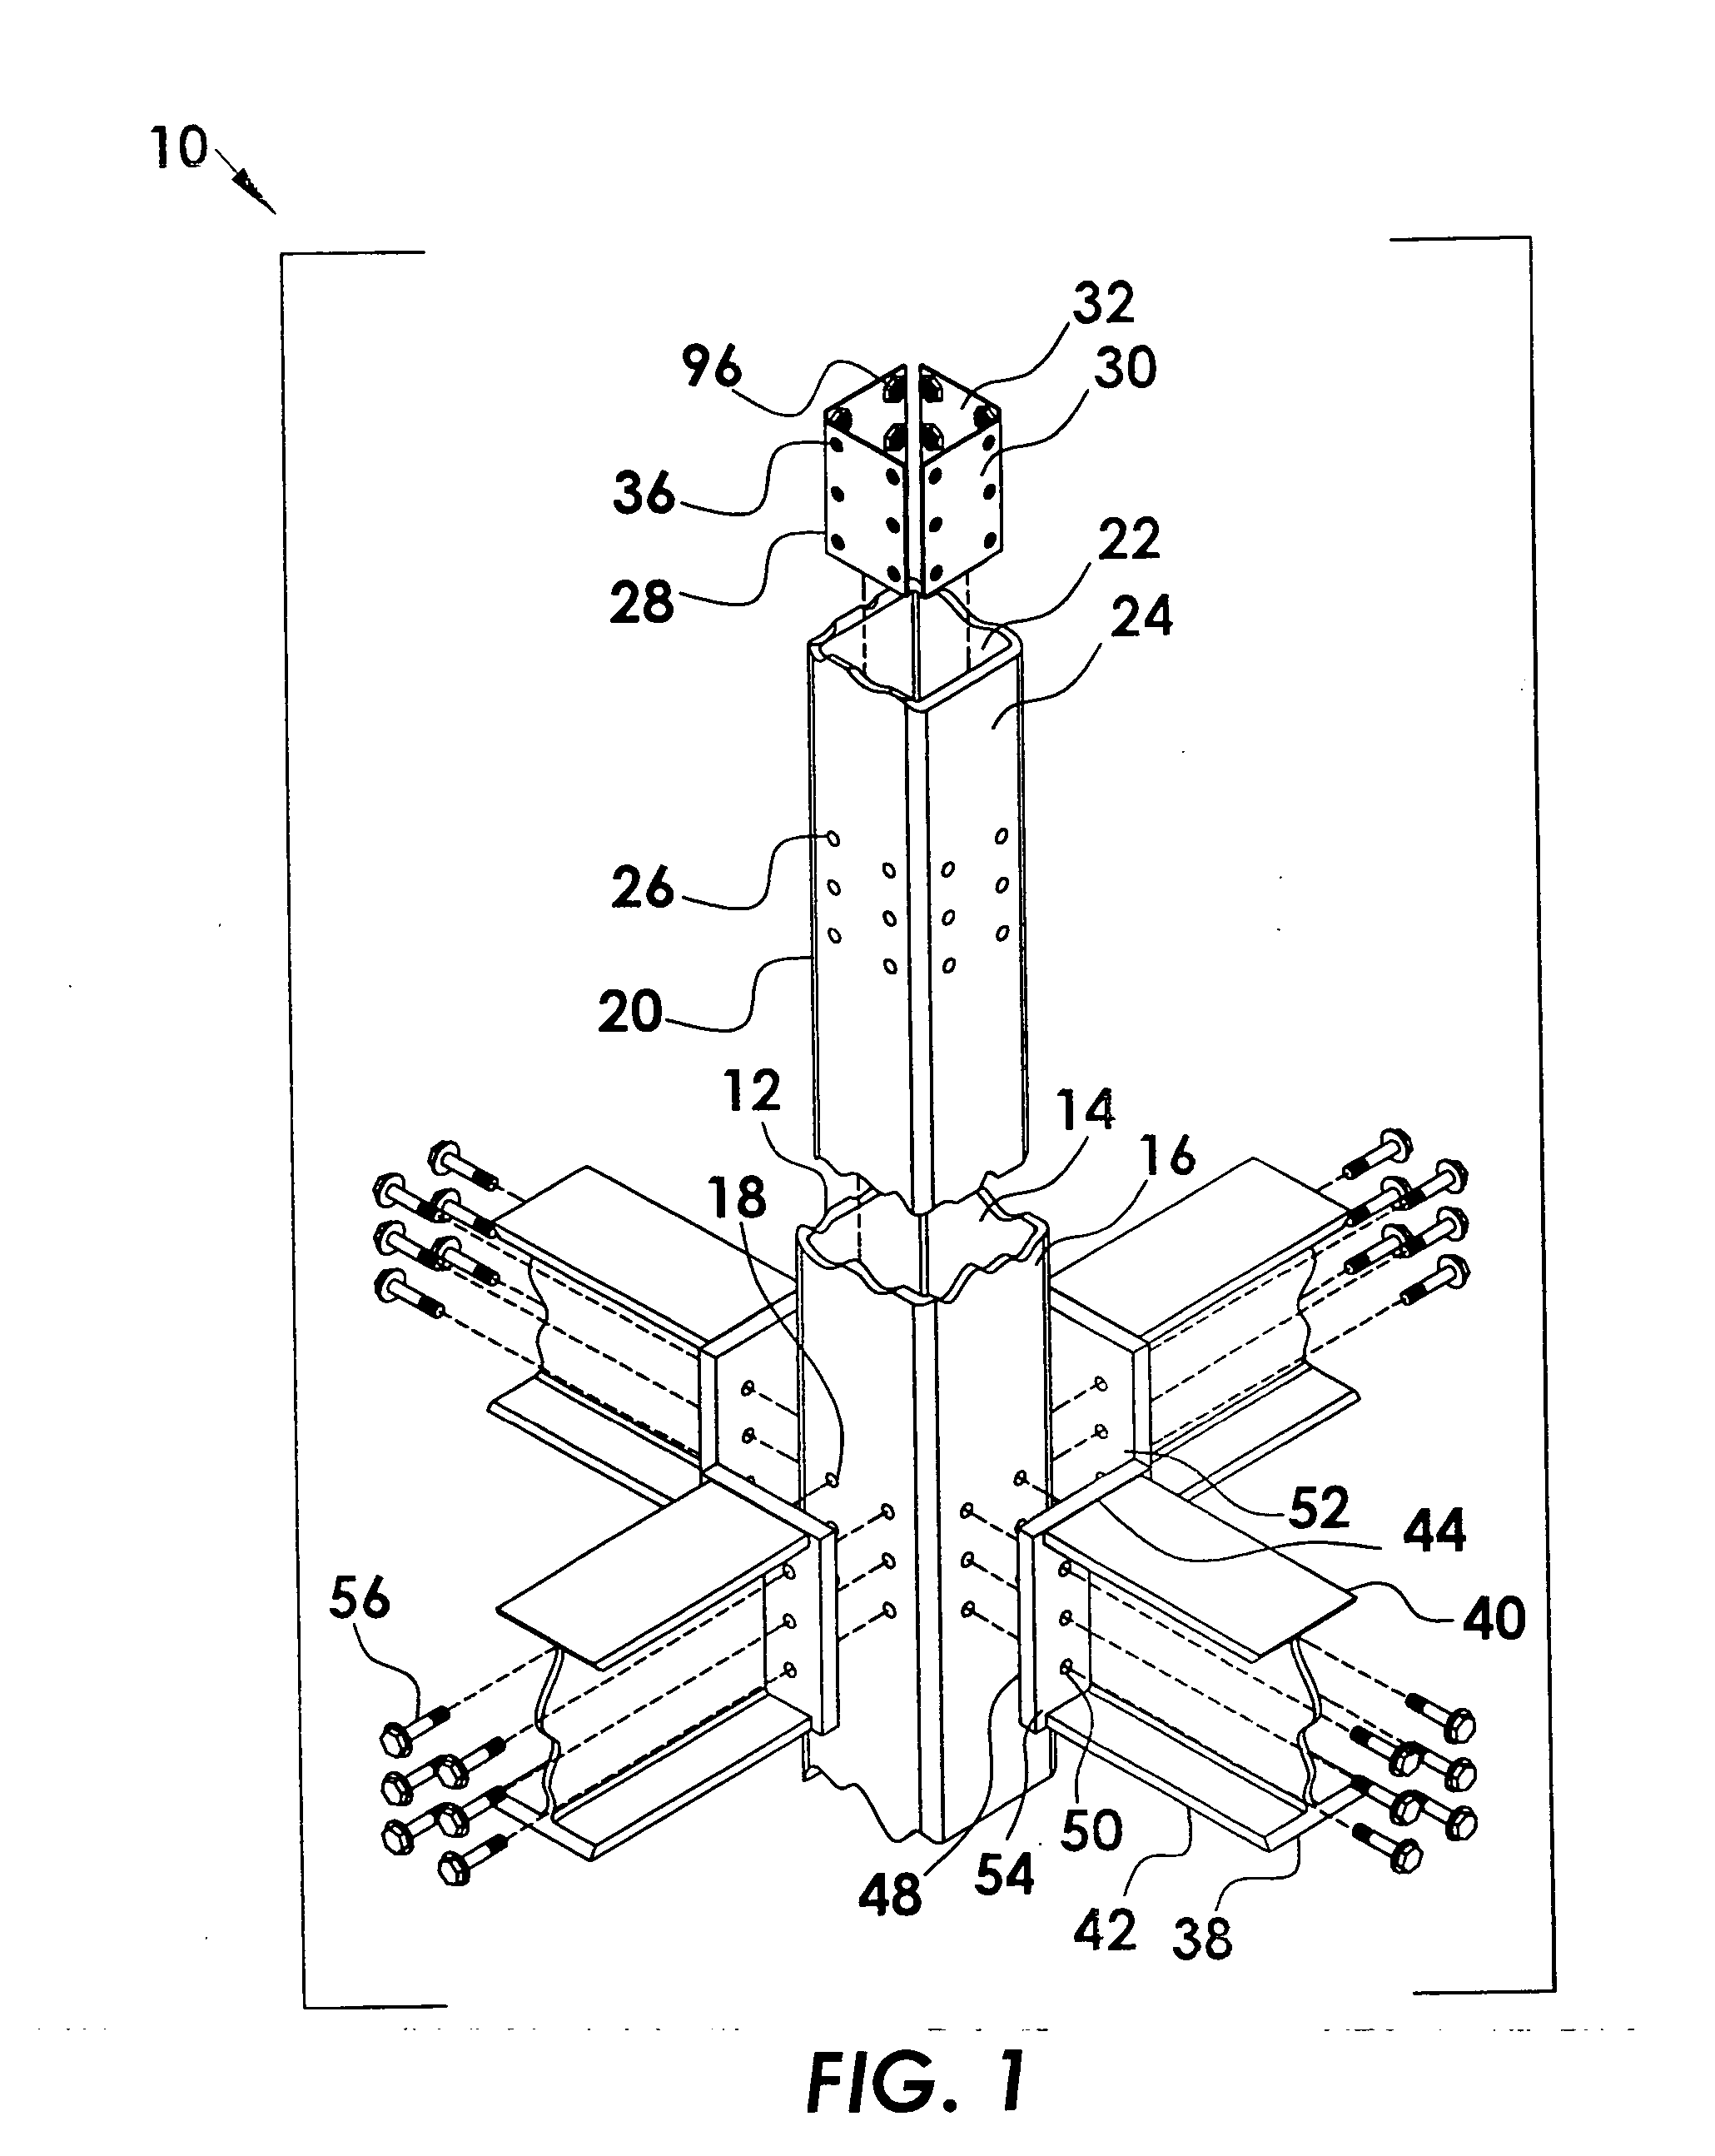 Moment-resistant building column insert system and method